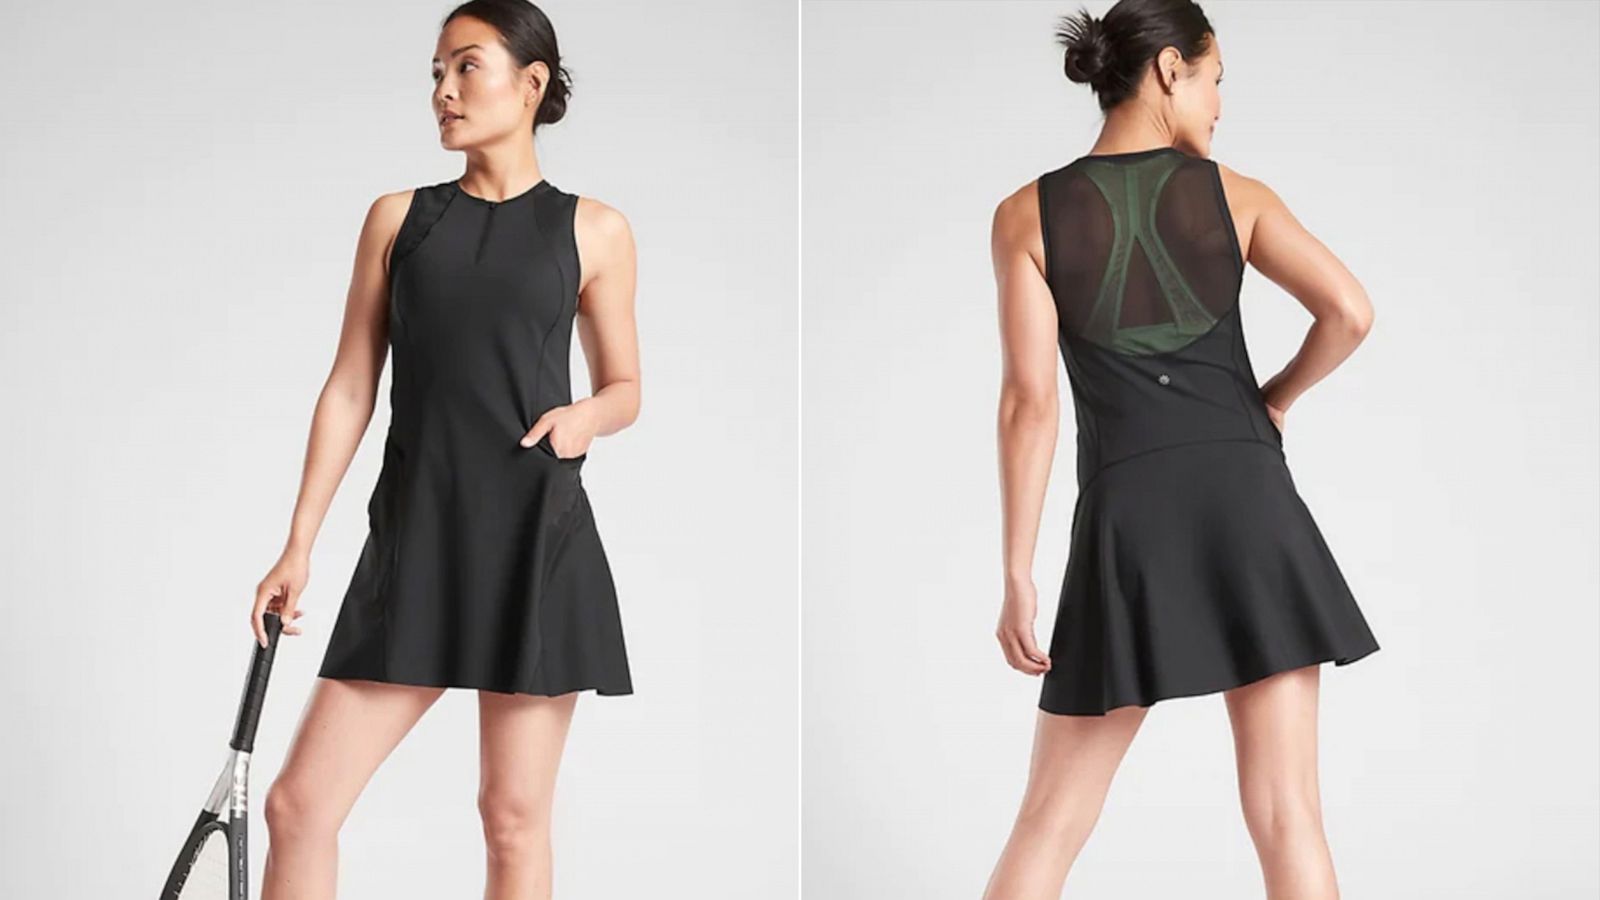 Are Exercise Dresses The Ultimate Everyday Outfit? How To Style Our New Fave